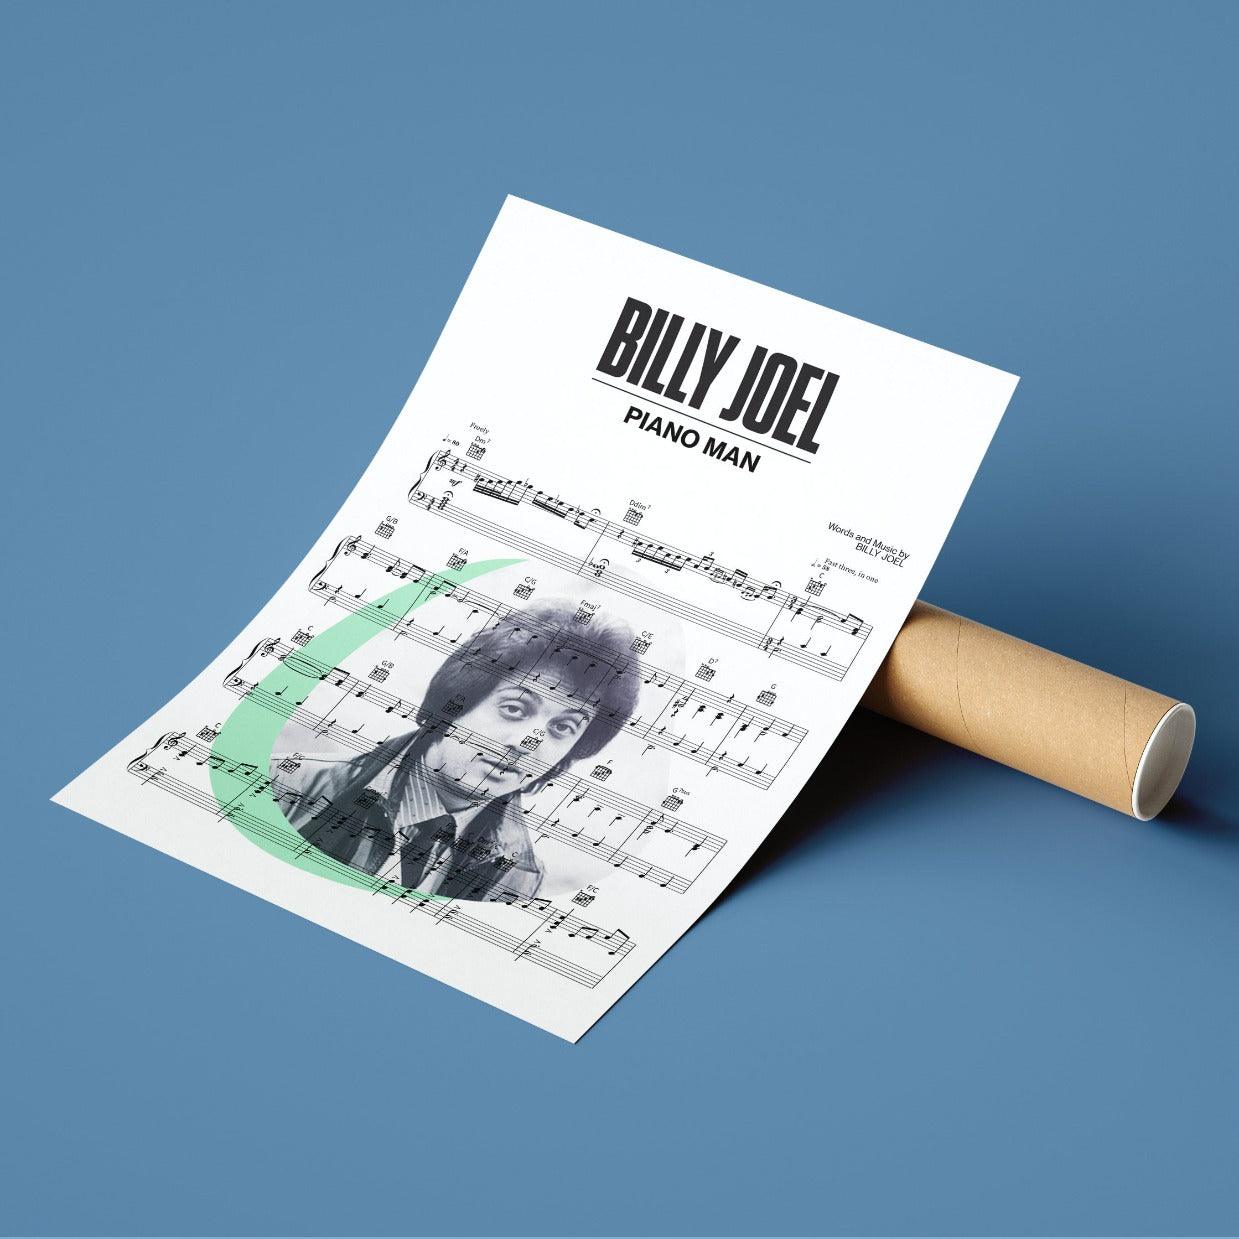 Billy Joel - Piano Man | Song Music Sheet Notes Print Everyone has a favorite Song lyric prints and Billy Joel now you can show the score as printed staff. The personal favorite song lyrics art shows the song chosen as the score.